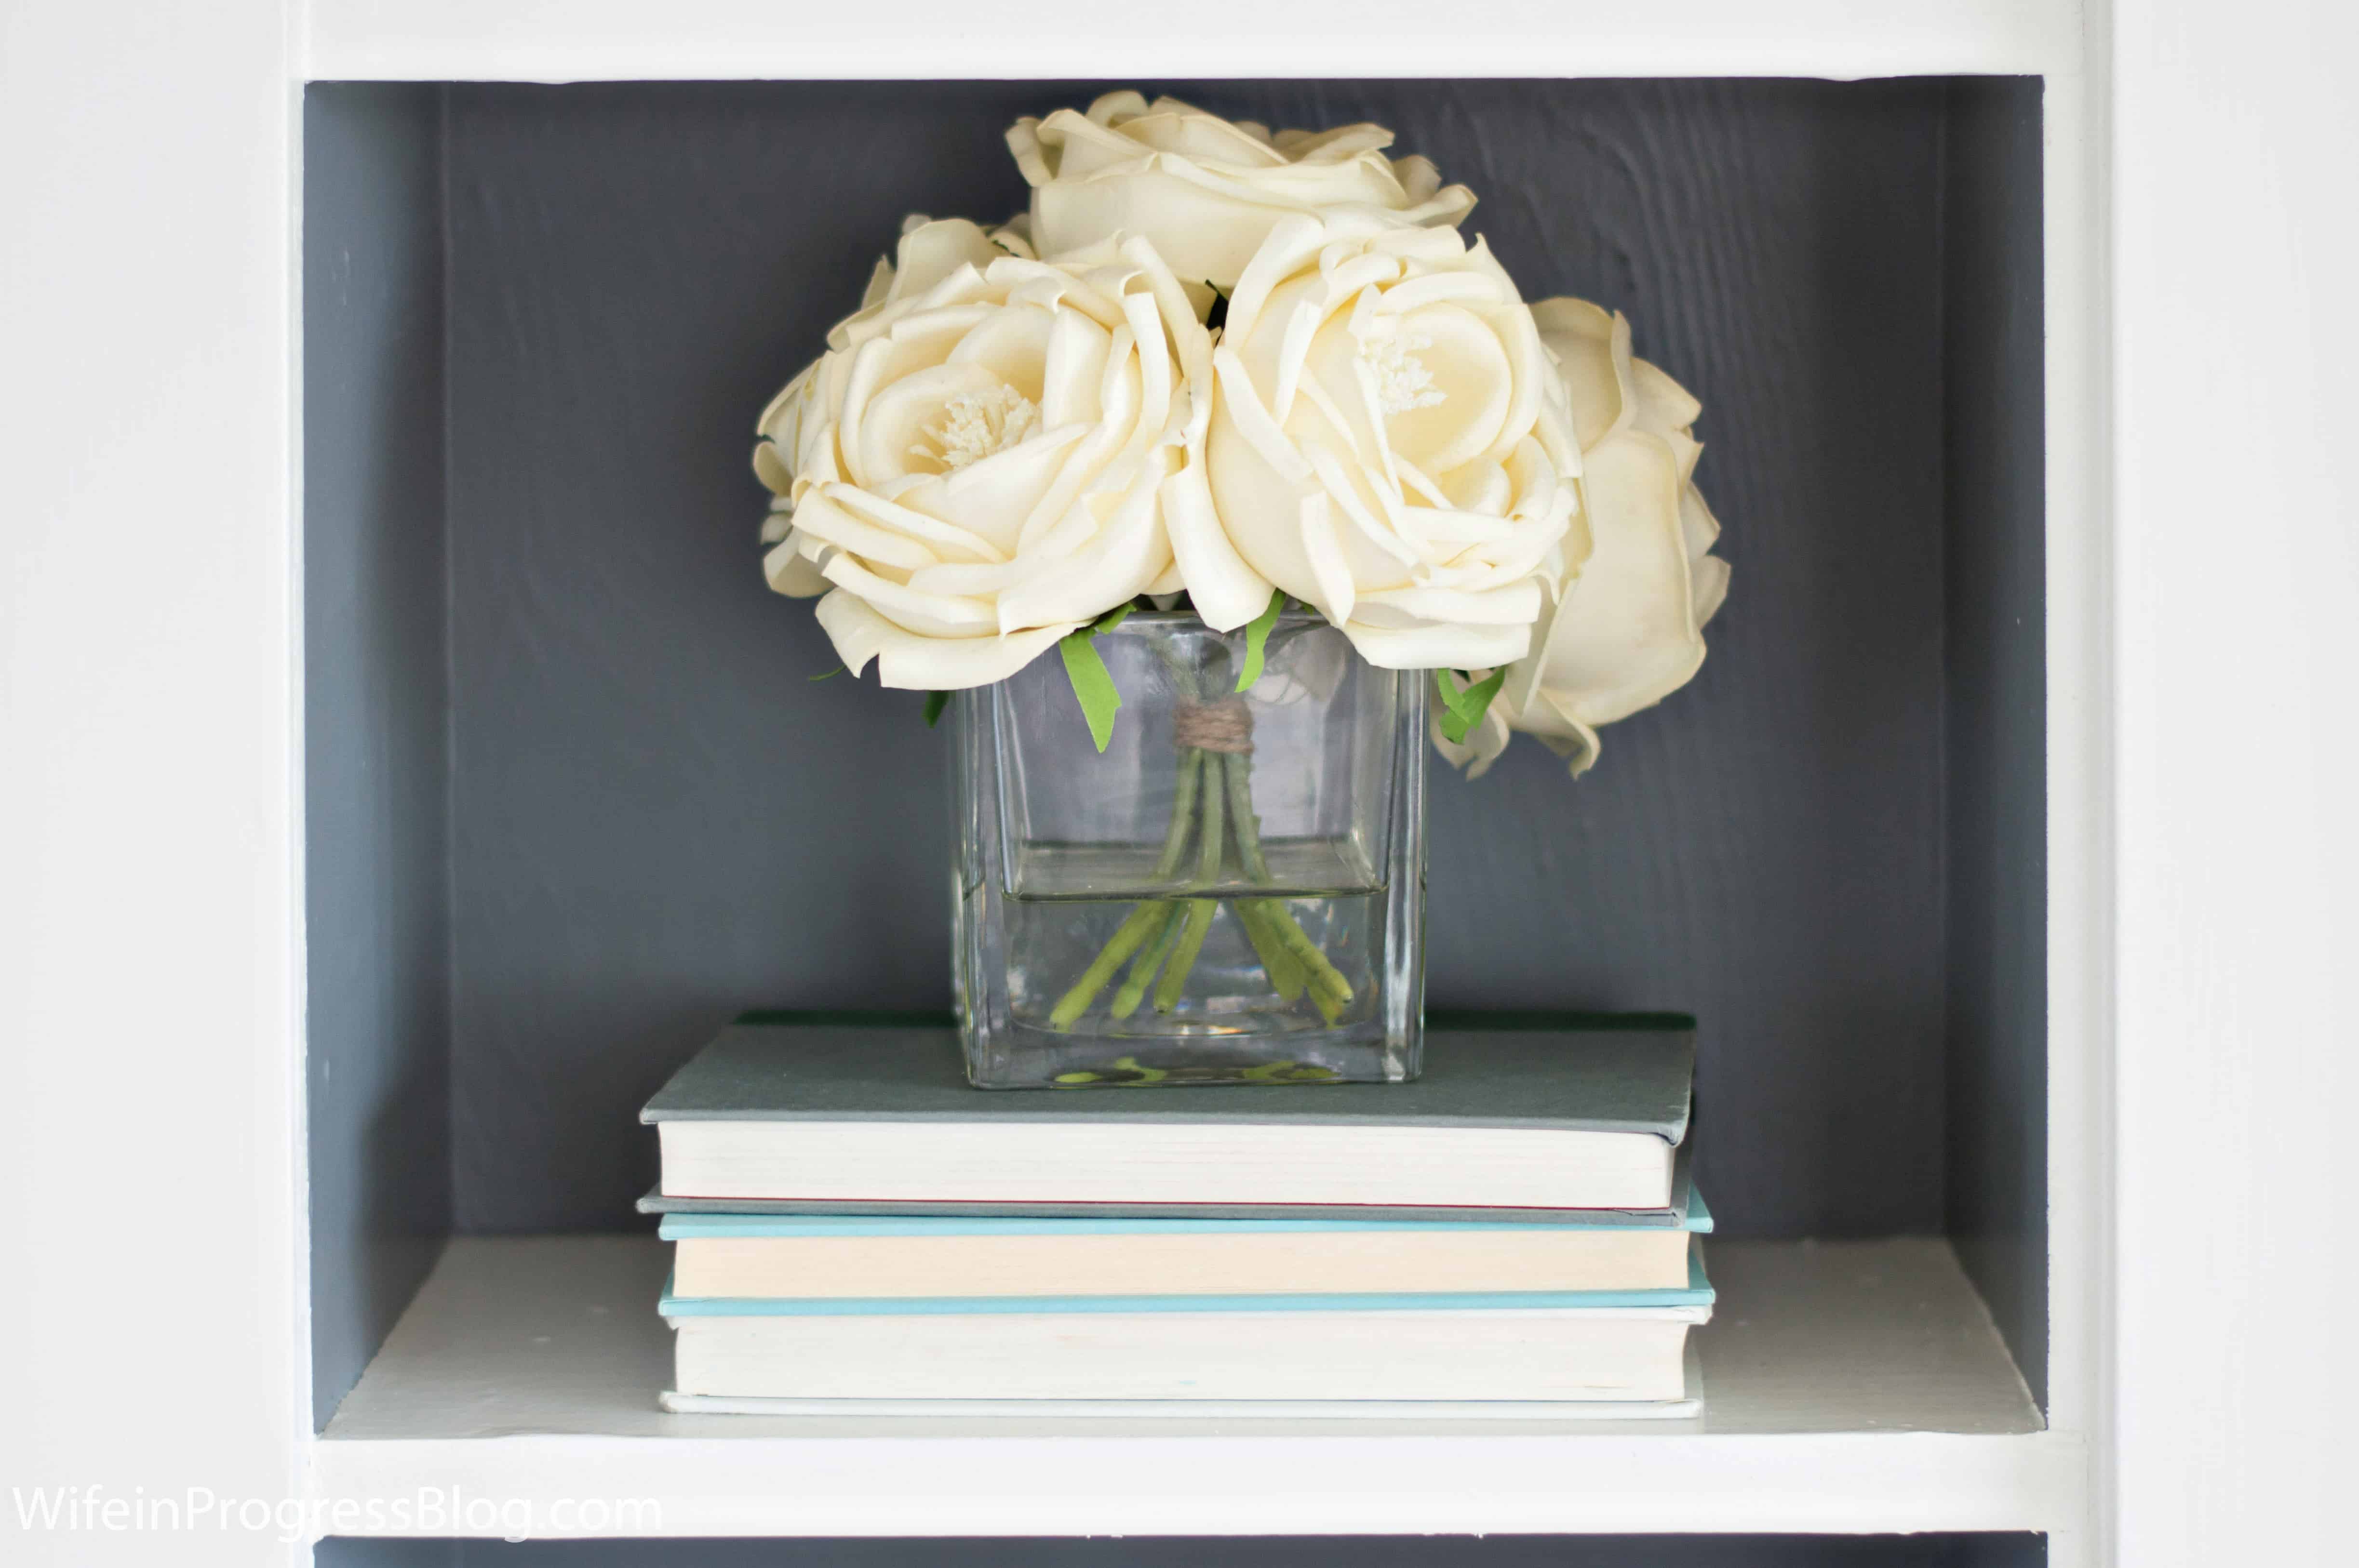 Are you adding height to your coffee table or bookshelf styling? If you're not, this might be one of the reasons your efforts never look quite right!